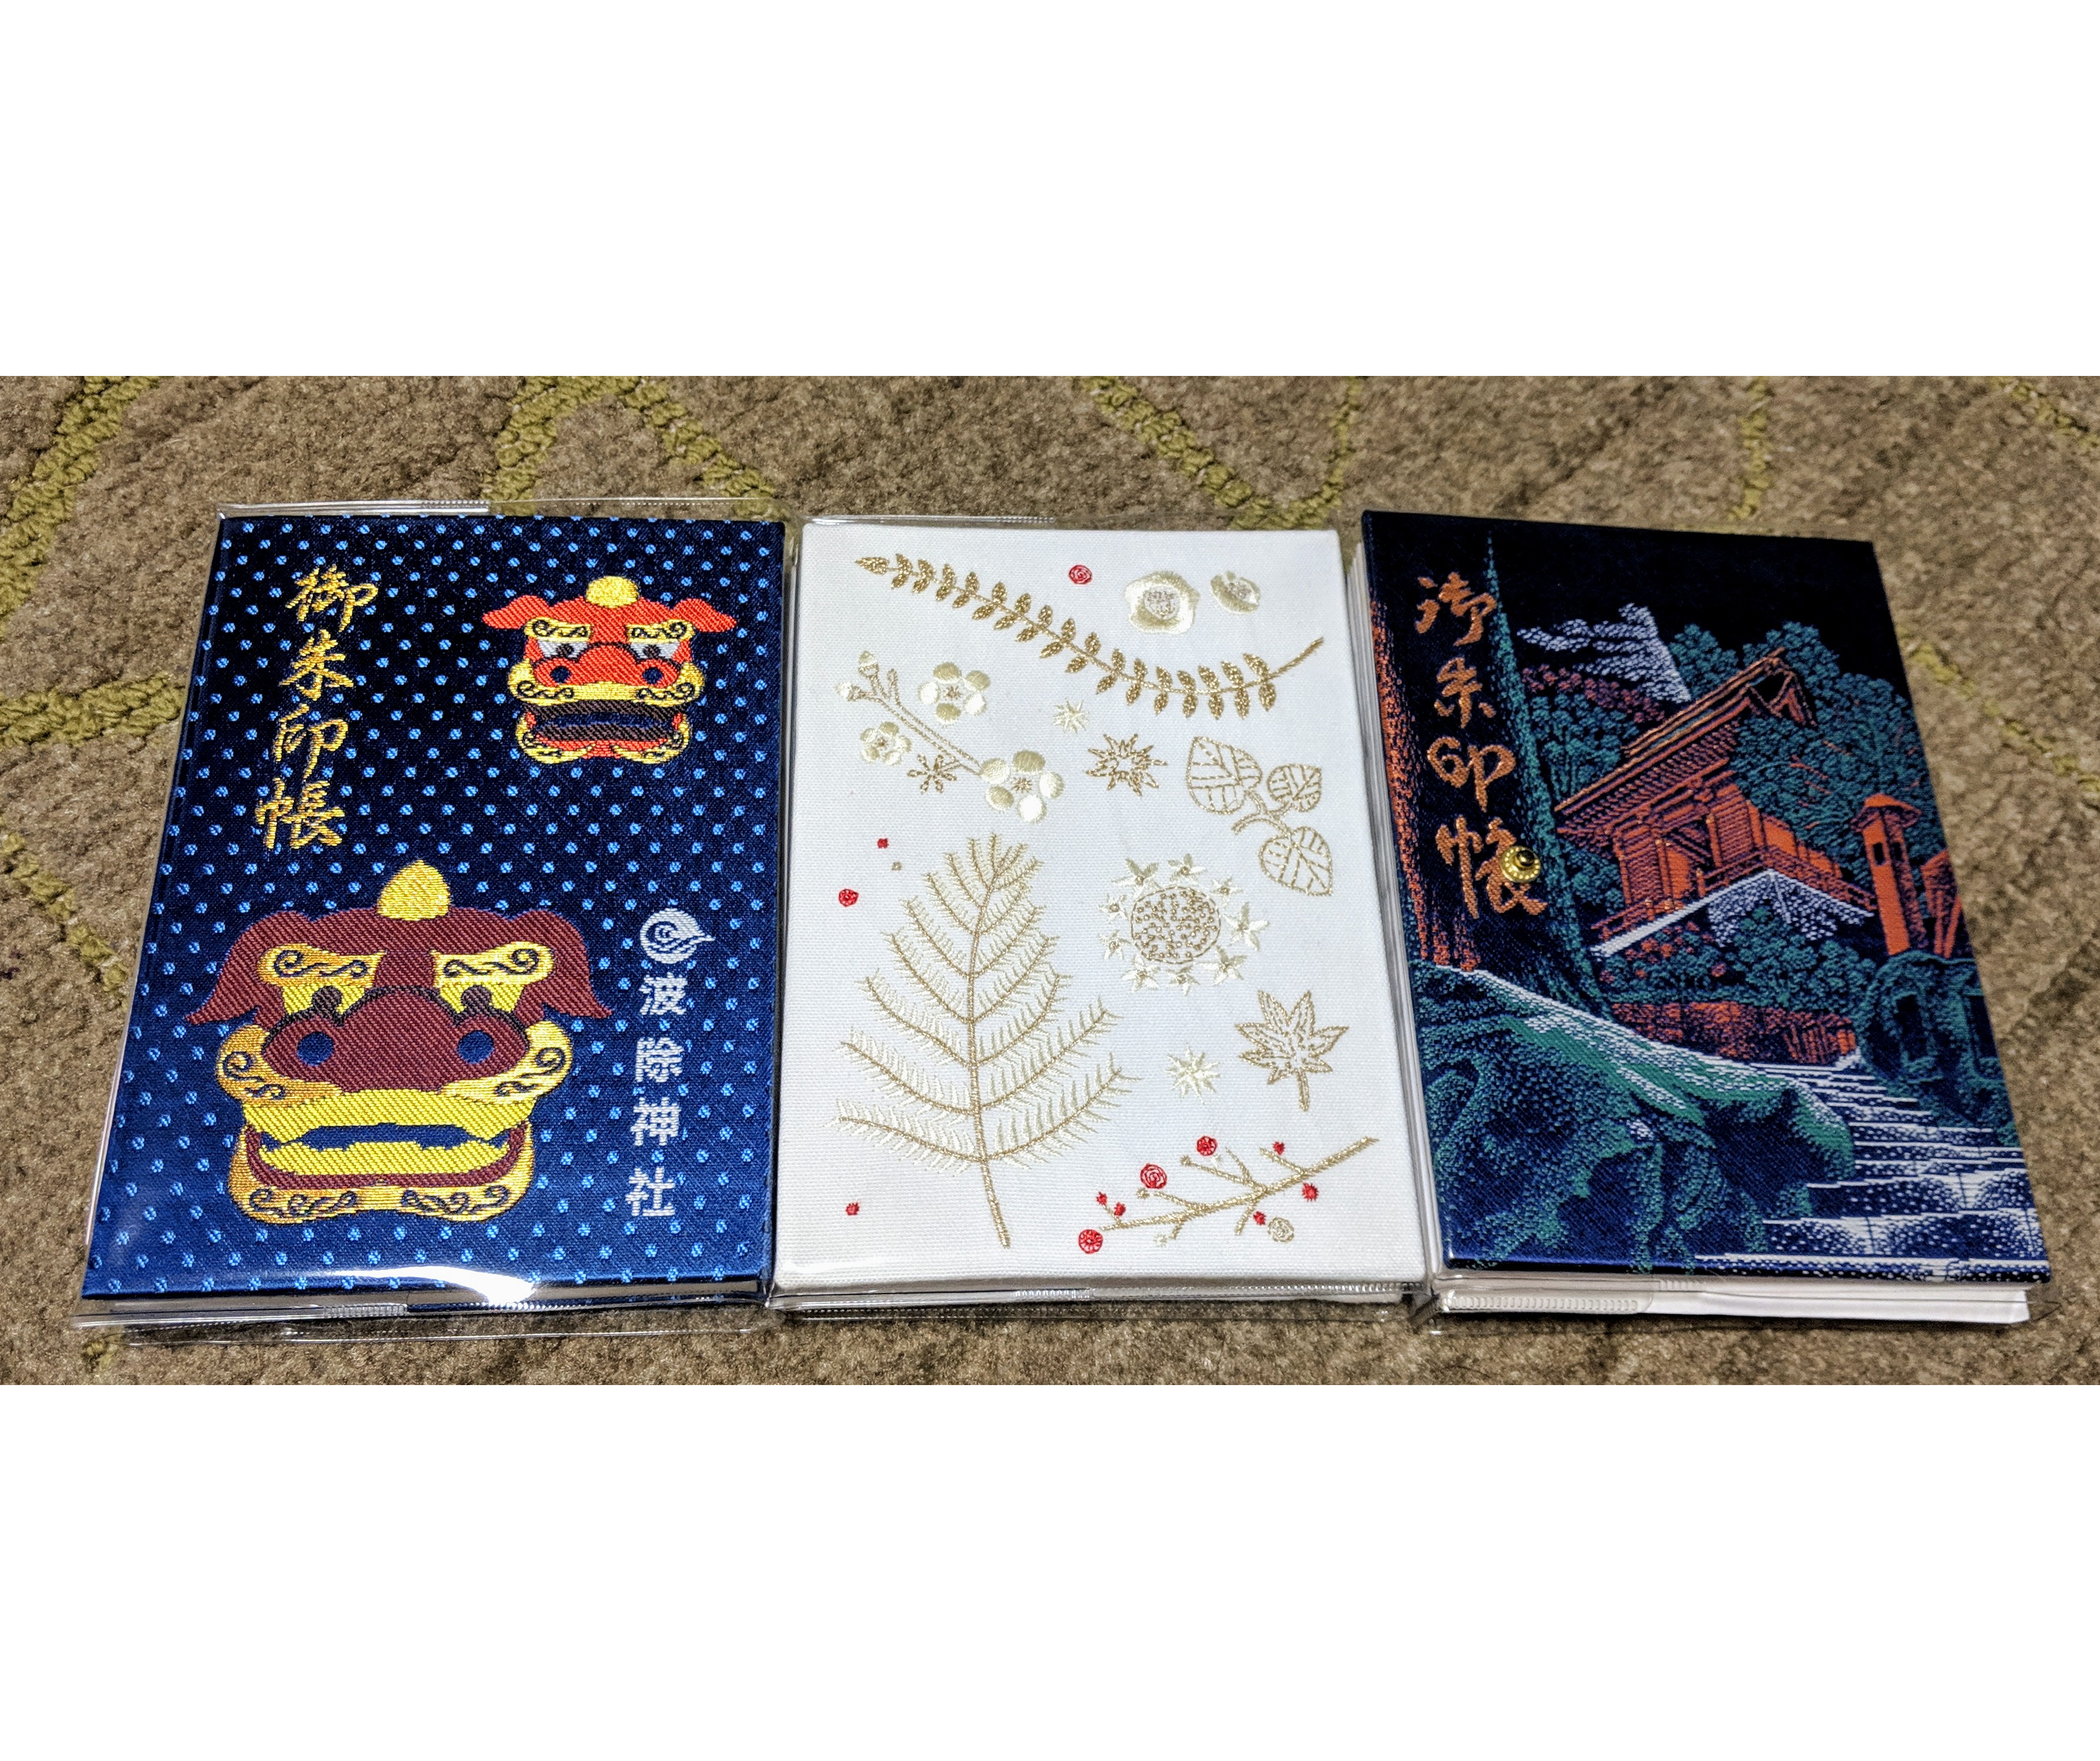 The covers of Hime's goshuinchou